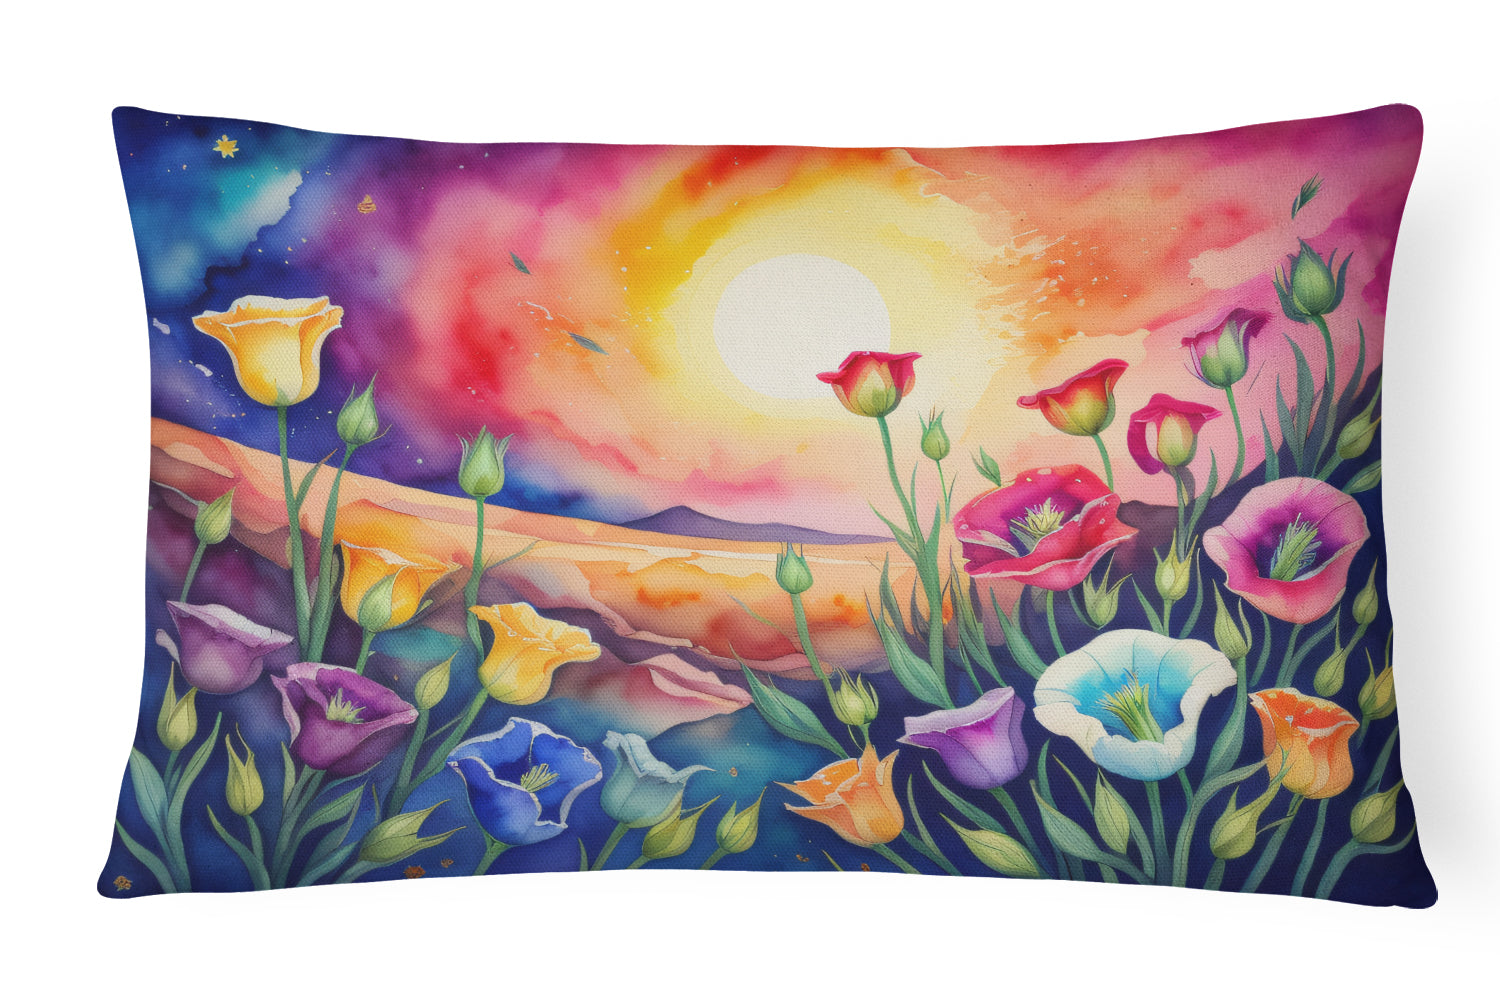 Buy this Lisianthus in Color Fabric Decorative Pillow